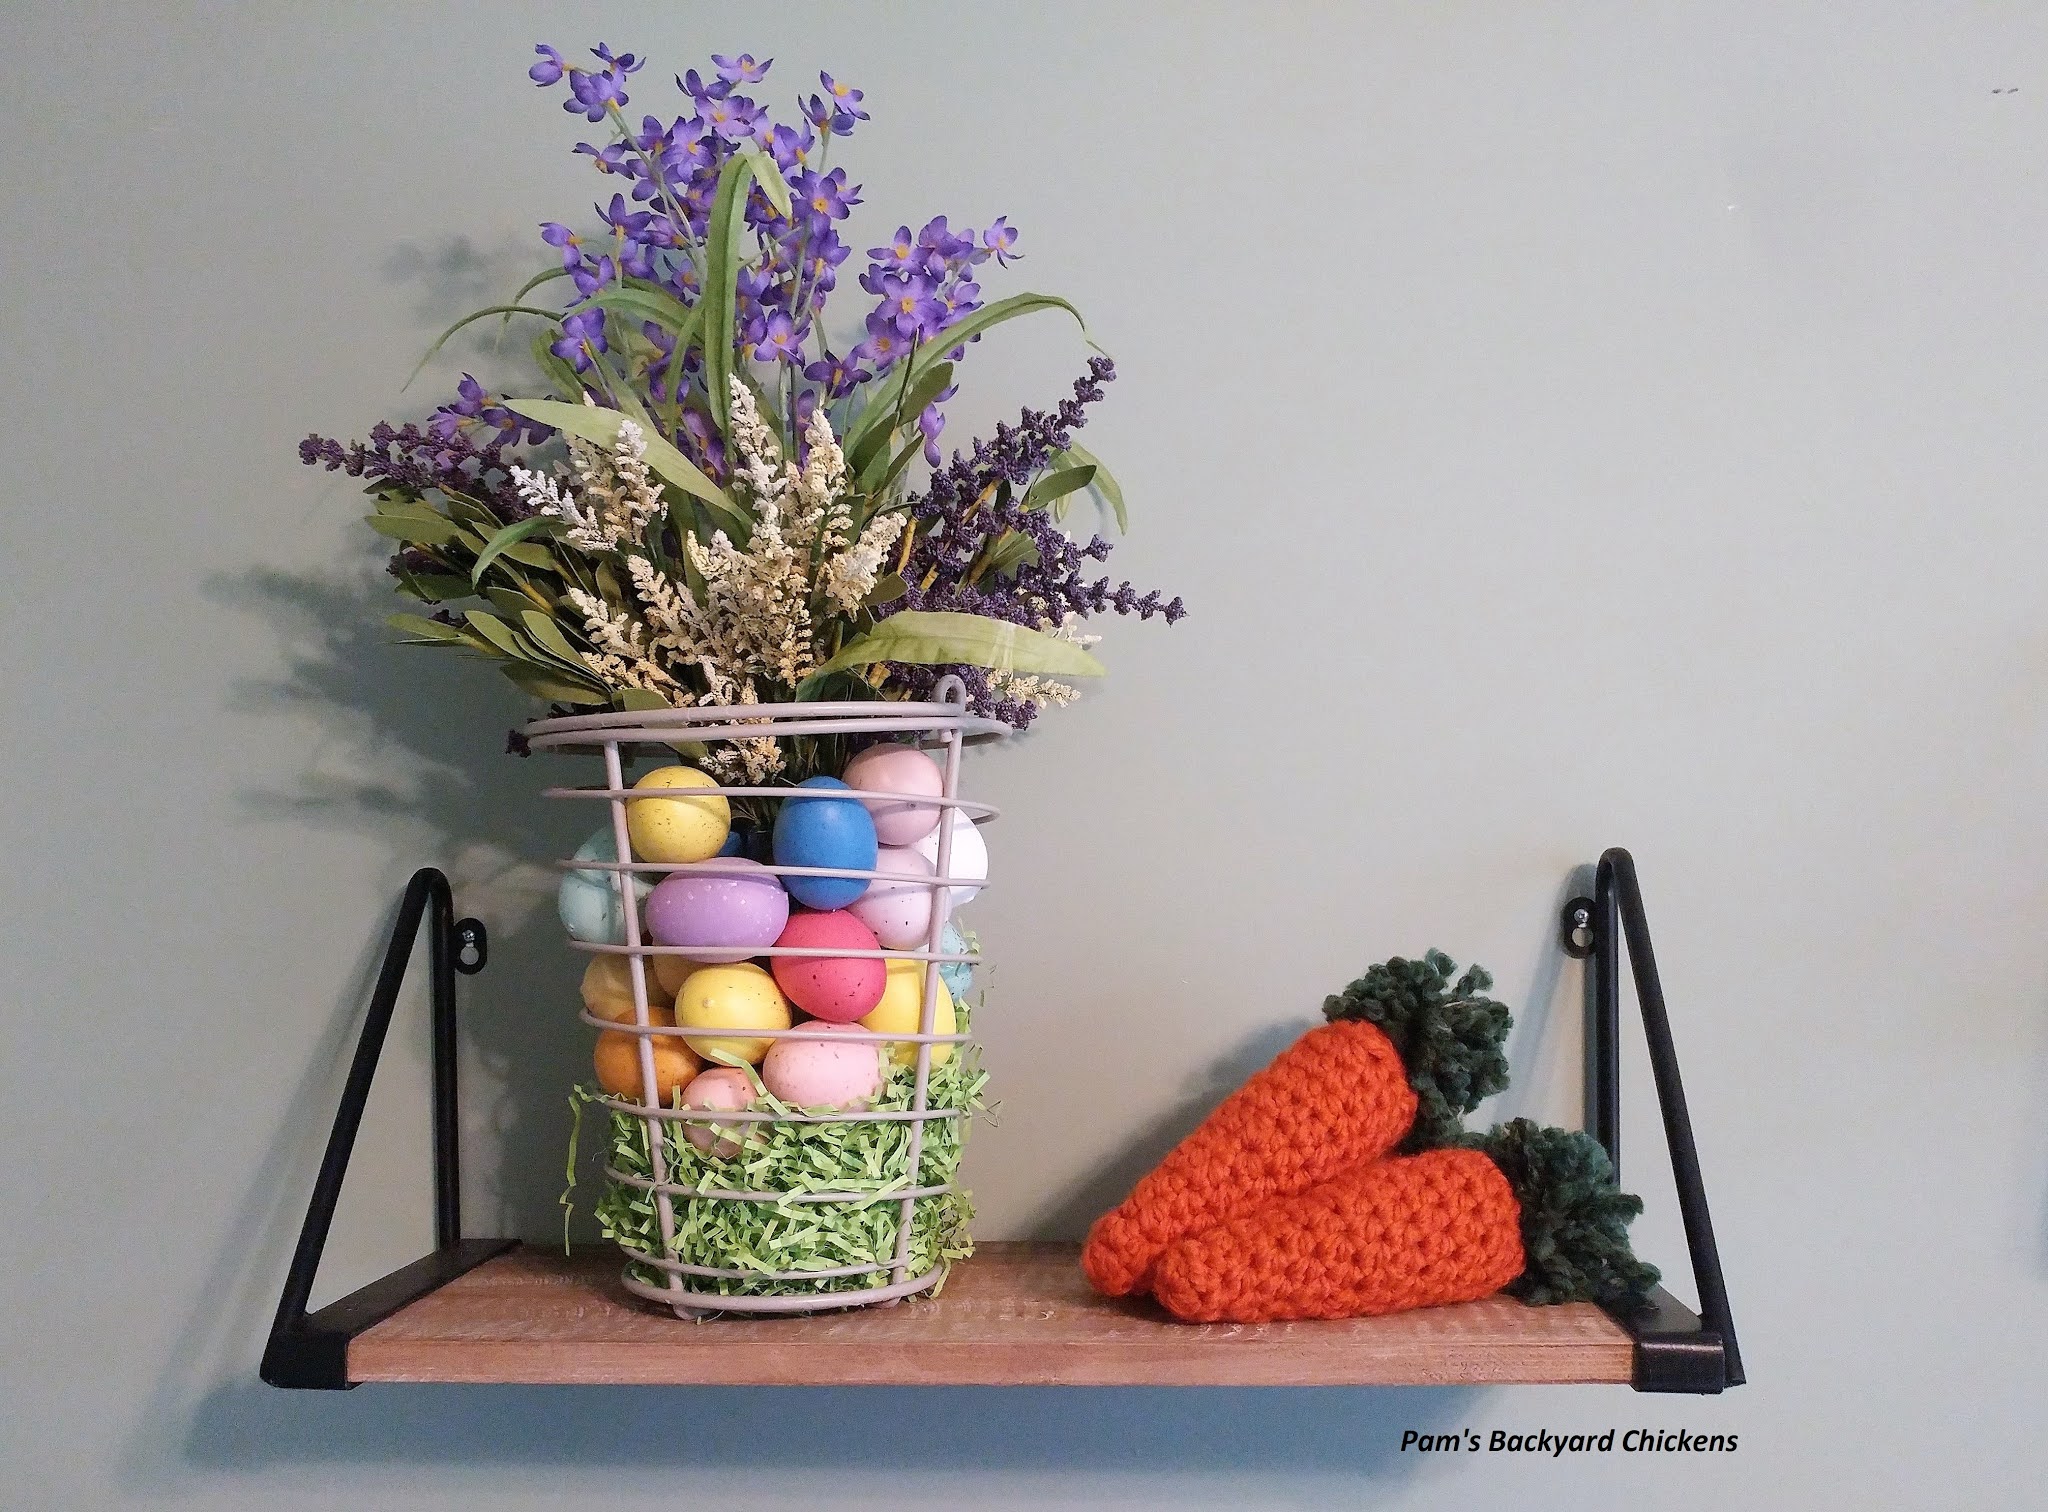 Pam's Backyard Chickens: How to Turn a Chicken Egg Basket into